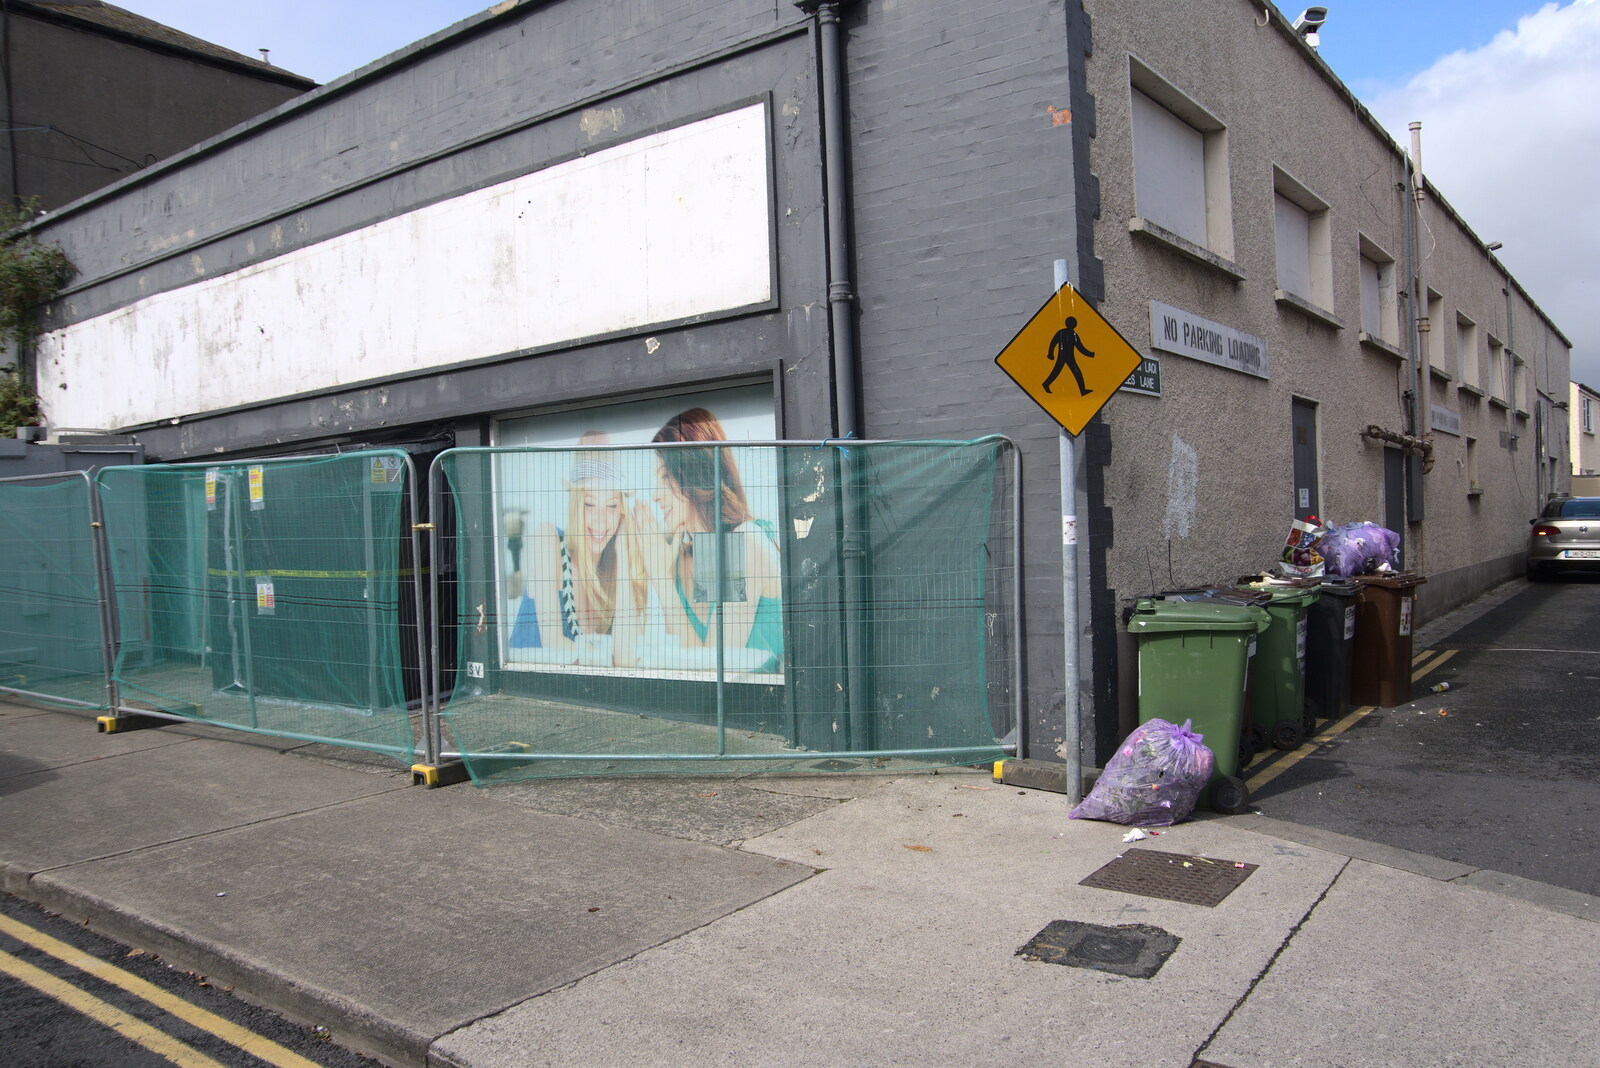 Another derelict shop from Manorhamilton and the Street Art of Dún Laoghaire, Ireland - 15th August 2021